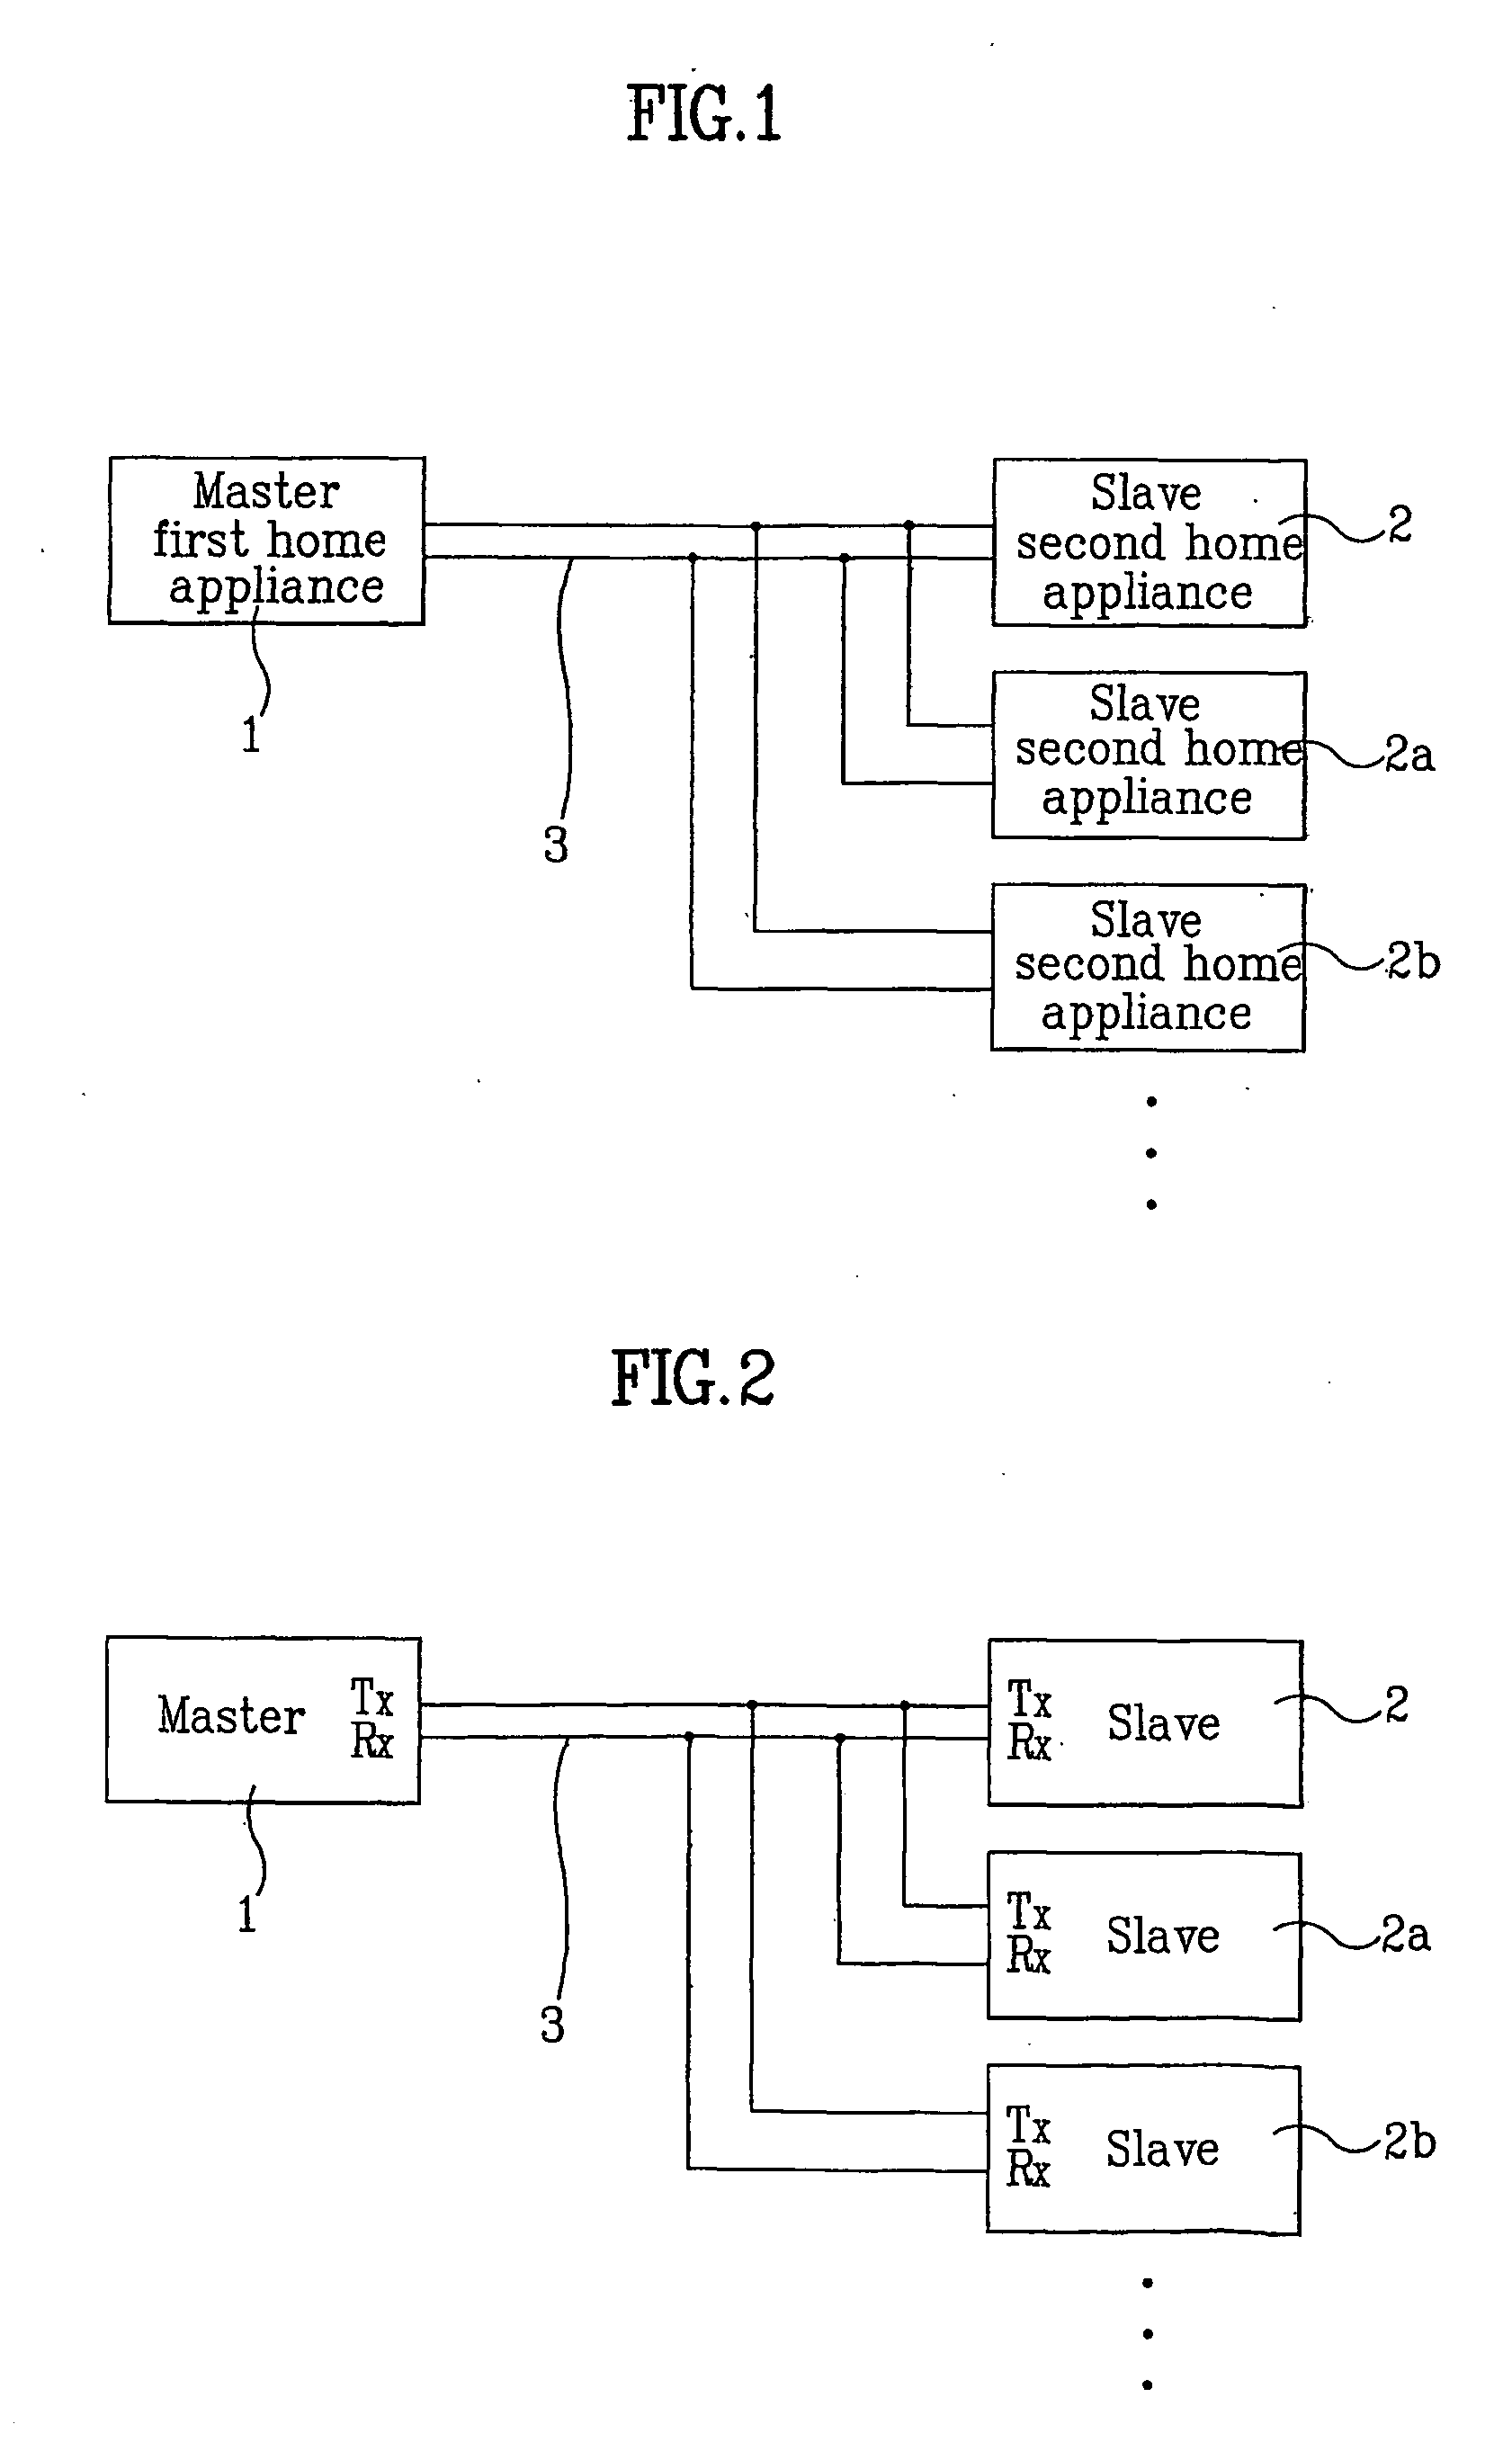 System and method for remote controlling and monitoring electric home appliances